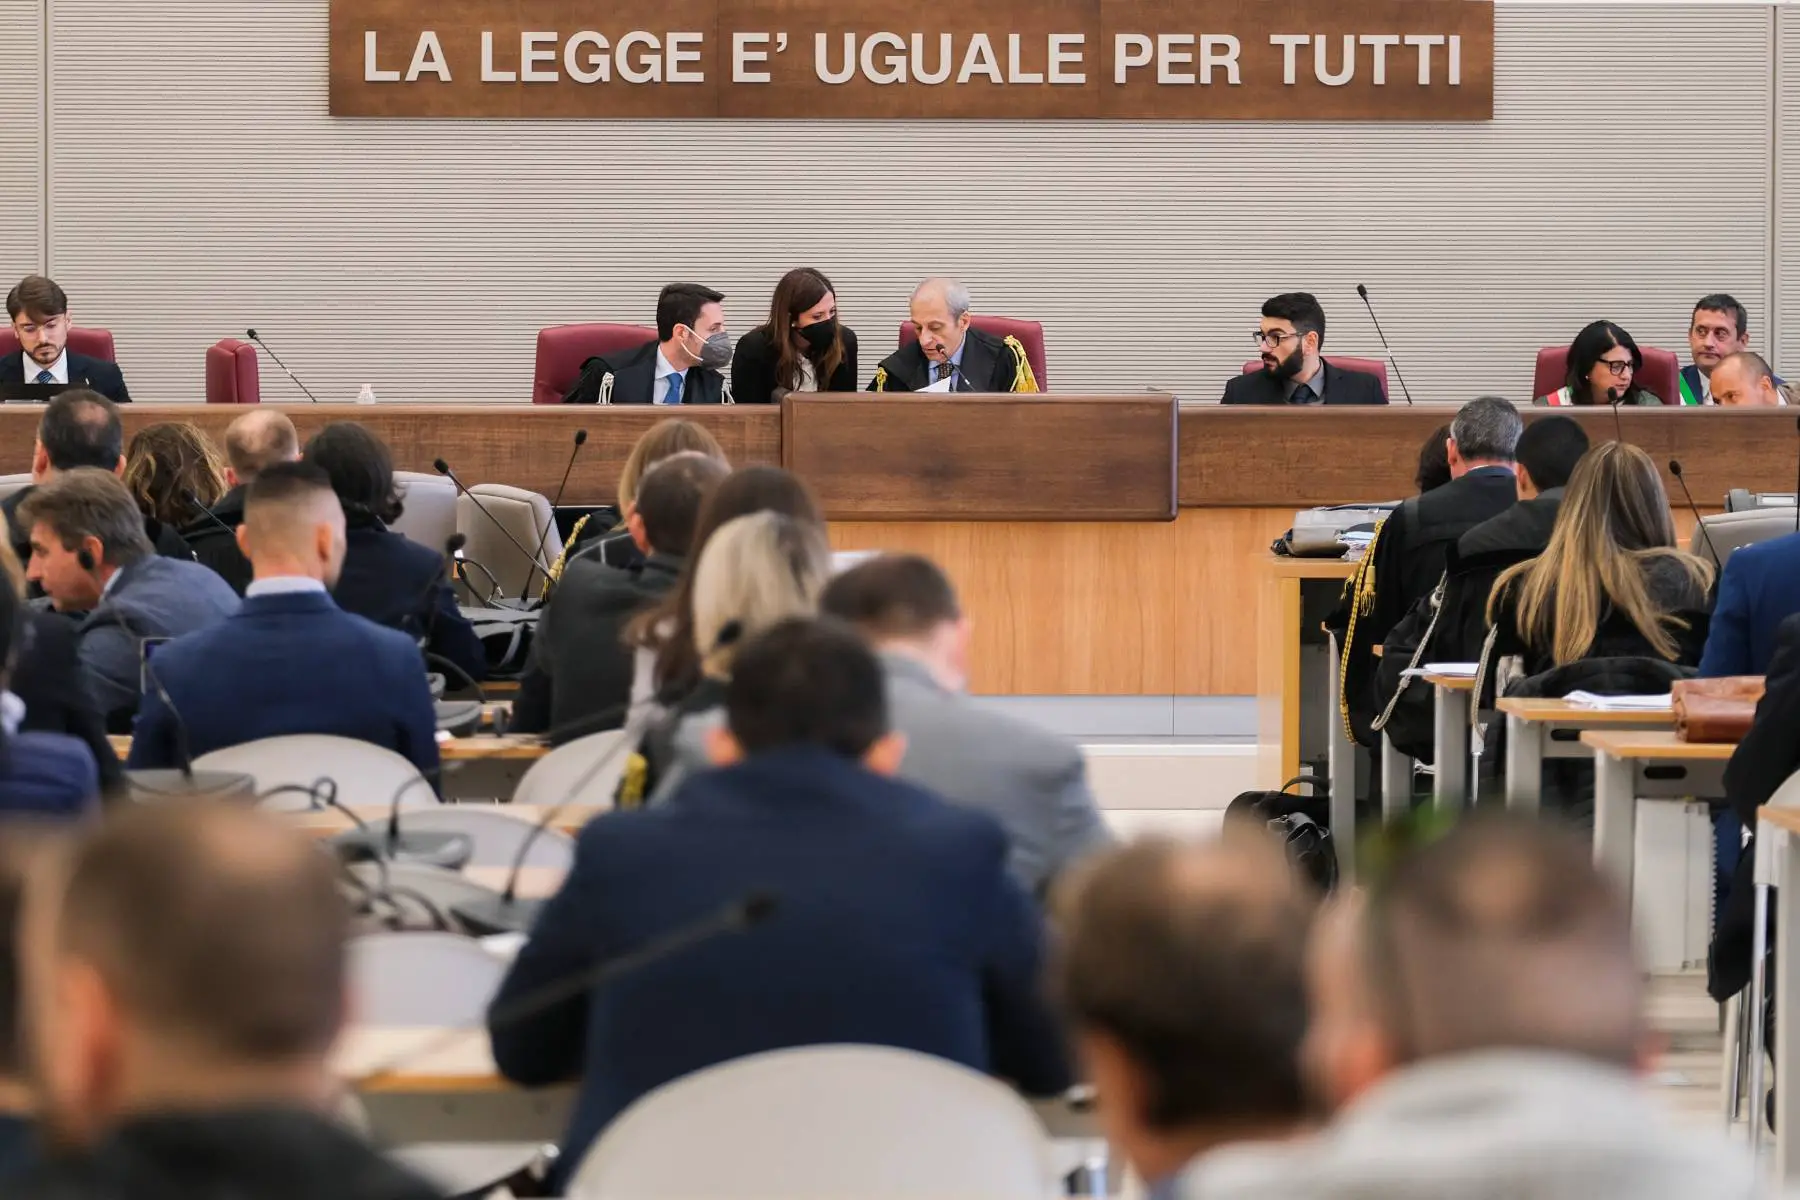 President of Assizes Court, Roberto Donatello (C), chairs the first hearing in the trial for tortures that took place in the Francesco Uccella prison. Above the judges, it reads 